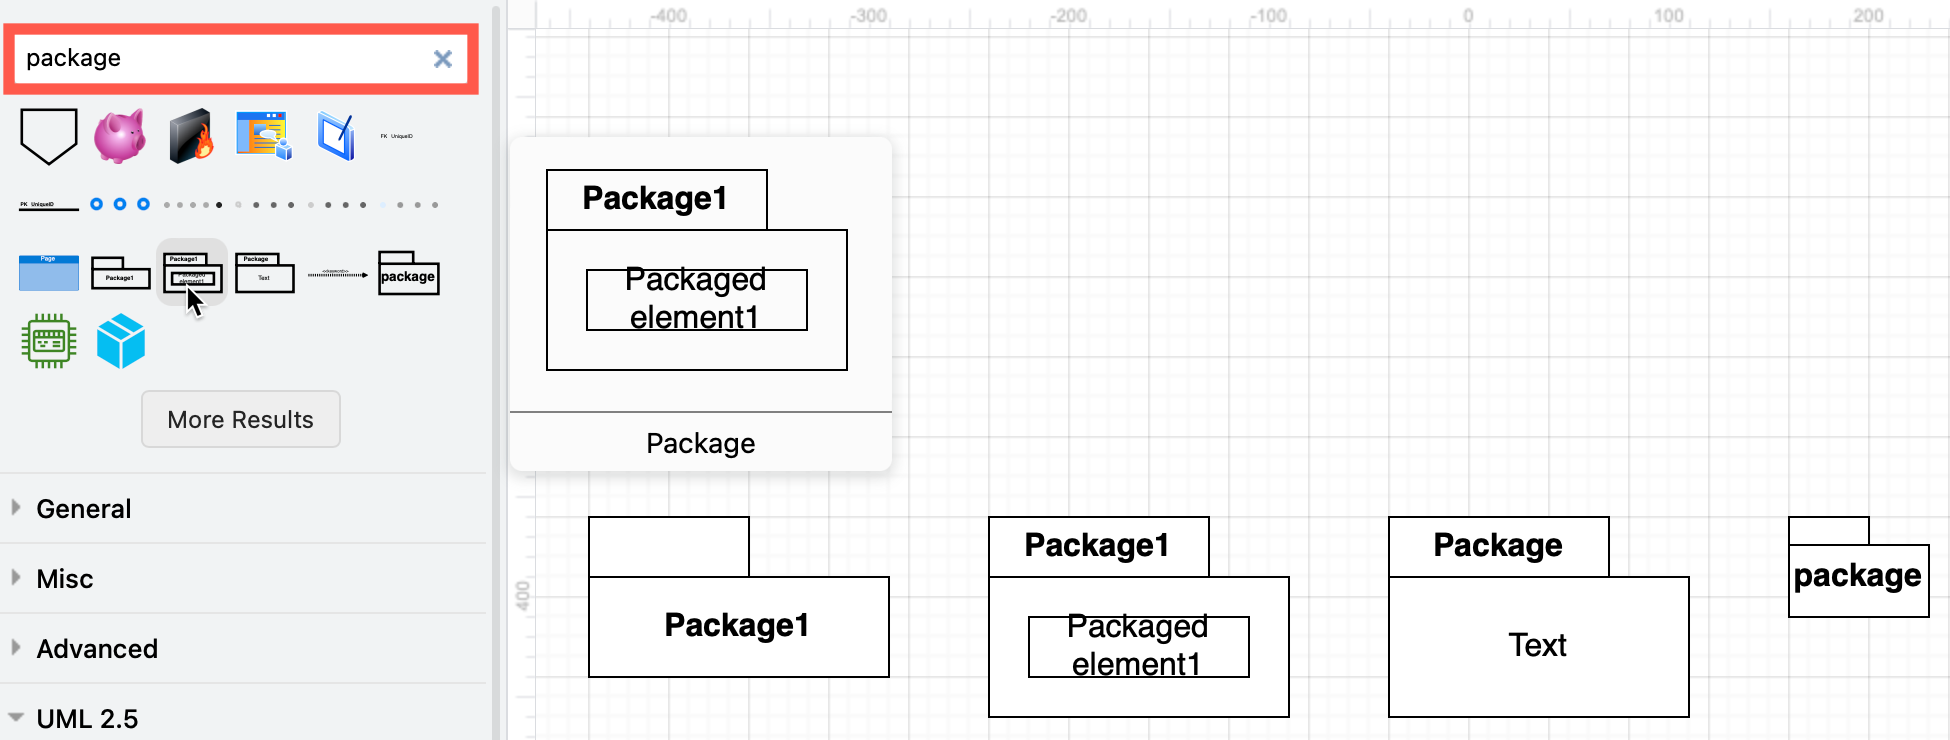 There are several package shapes which can be used in UML component and package diagrams in draw.io